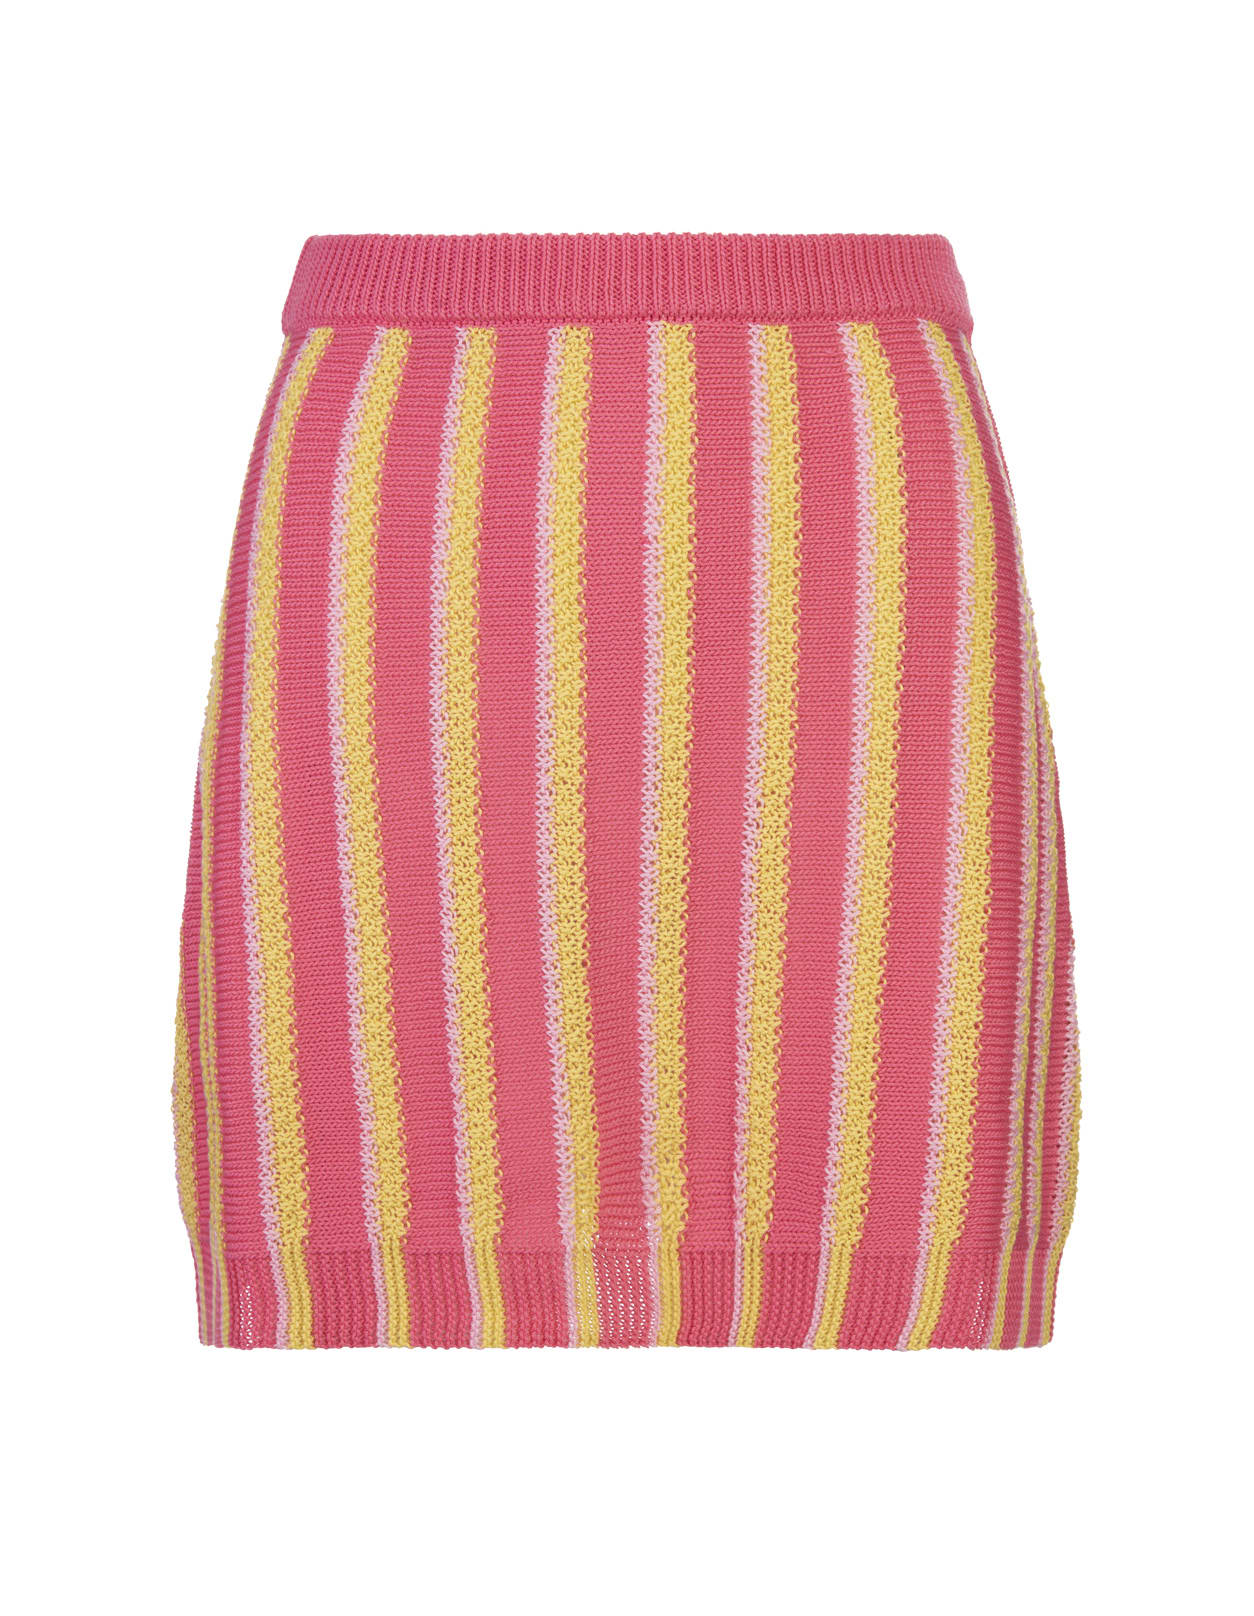 Shop Marni Pink, Yellow And White Striped Knitted Mini Skirt